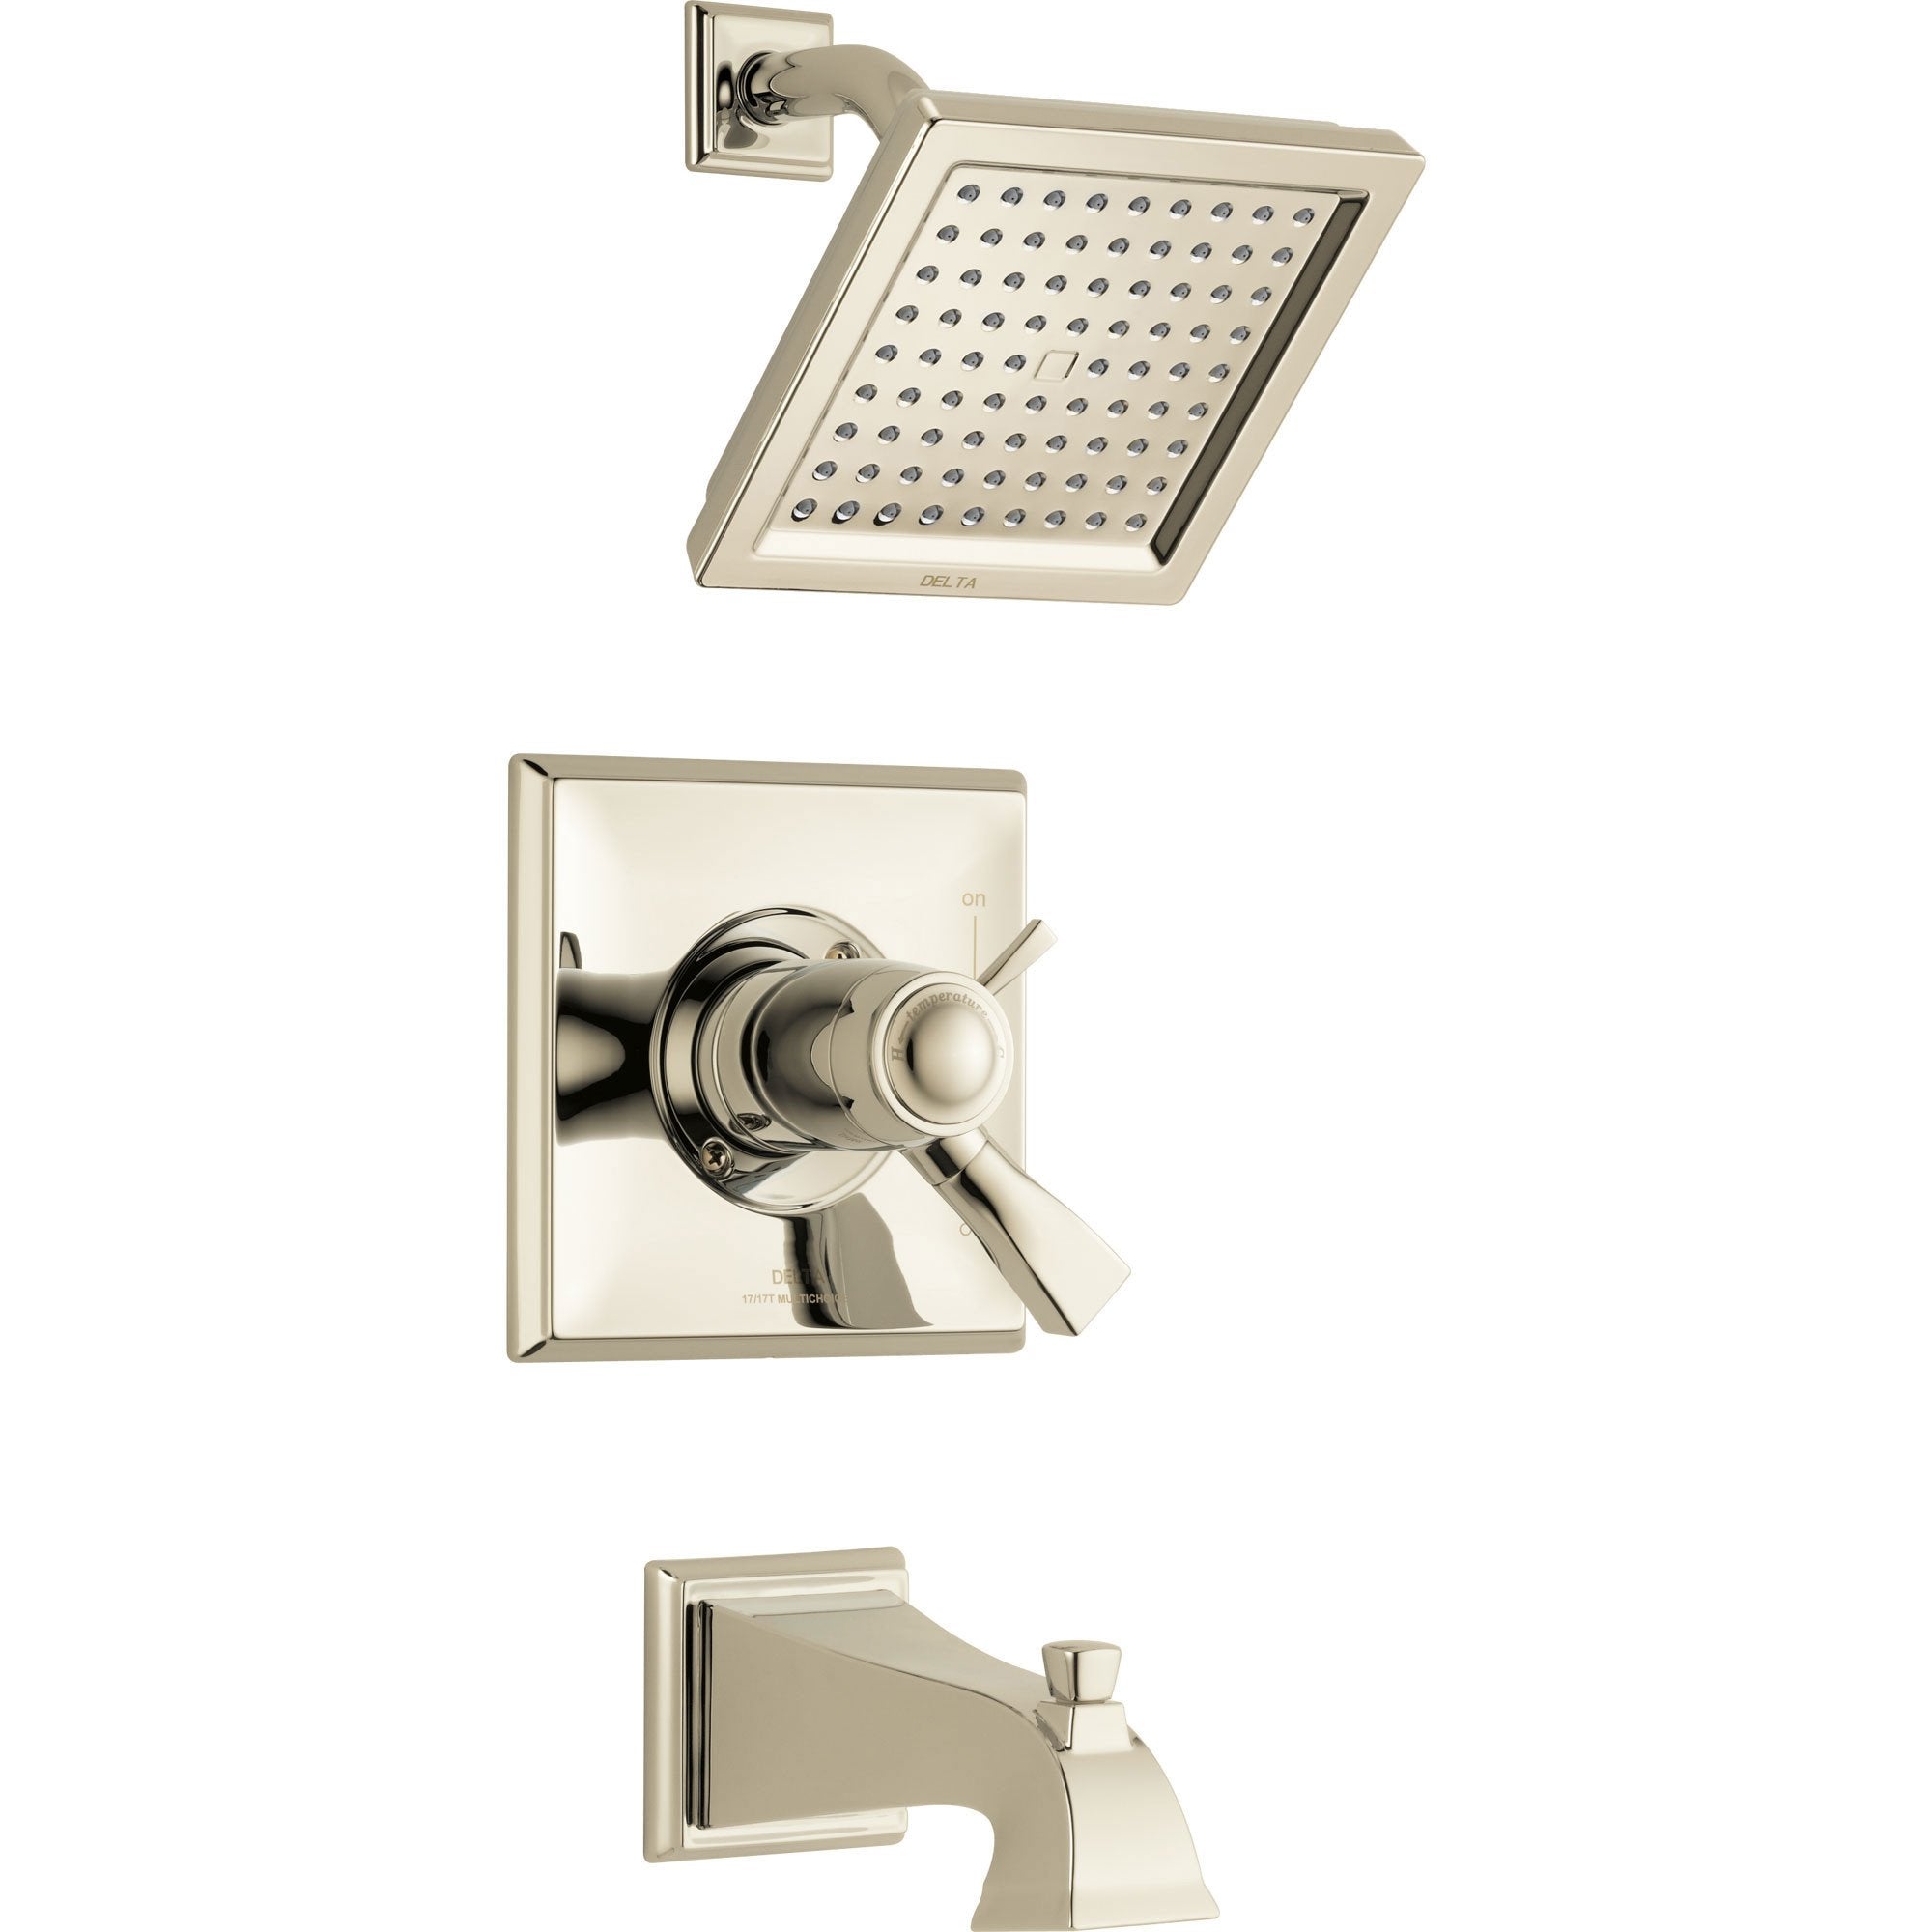 Delta Dryden Modern Polished Nickel Finish TempAssure 17T Tub and Shower Combination Faucet with Dual Temperature and Pressure Control INCLUDES Rough-in Valve with Stops D1103V